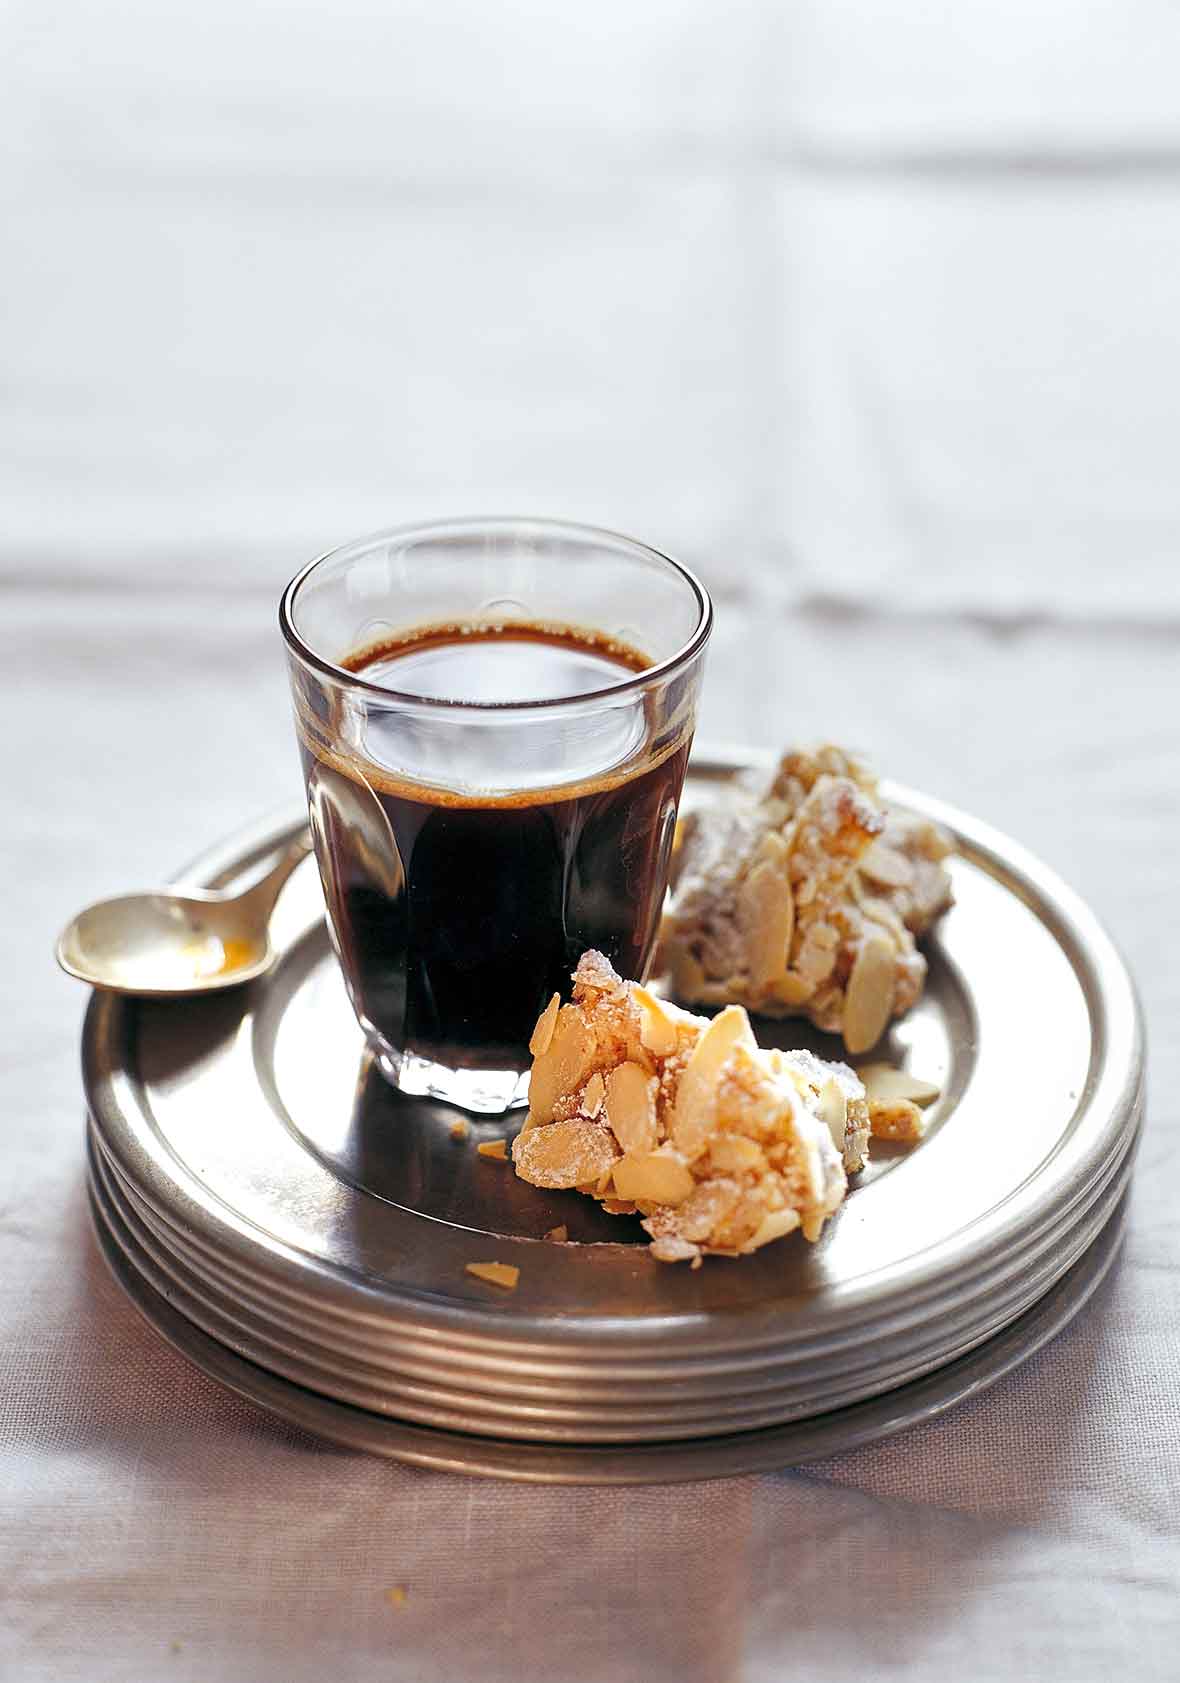 Two pieces of almond biscotti on a stack of plates with a glass of coffee